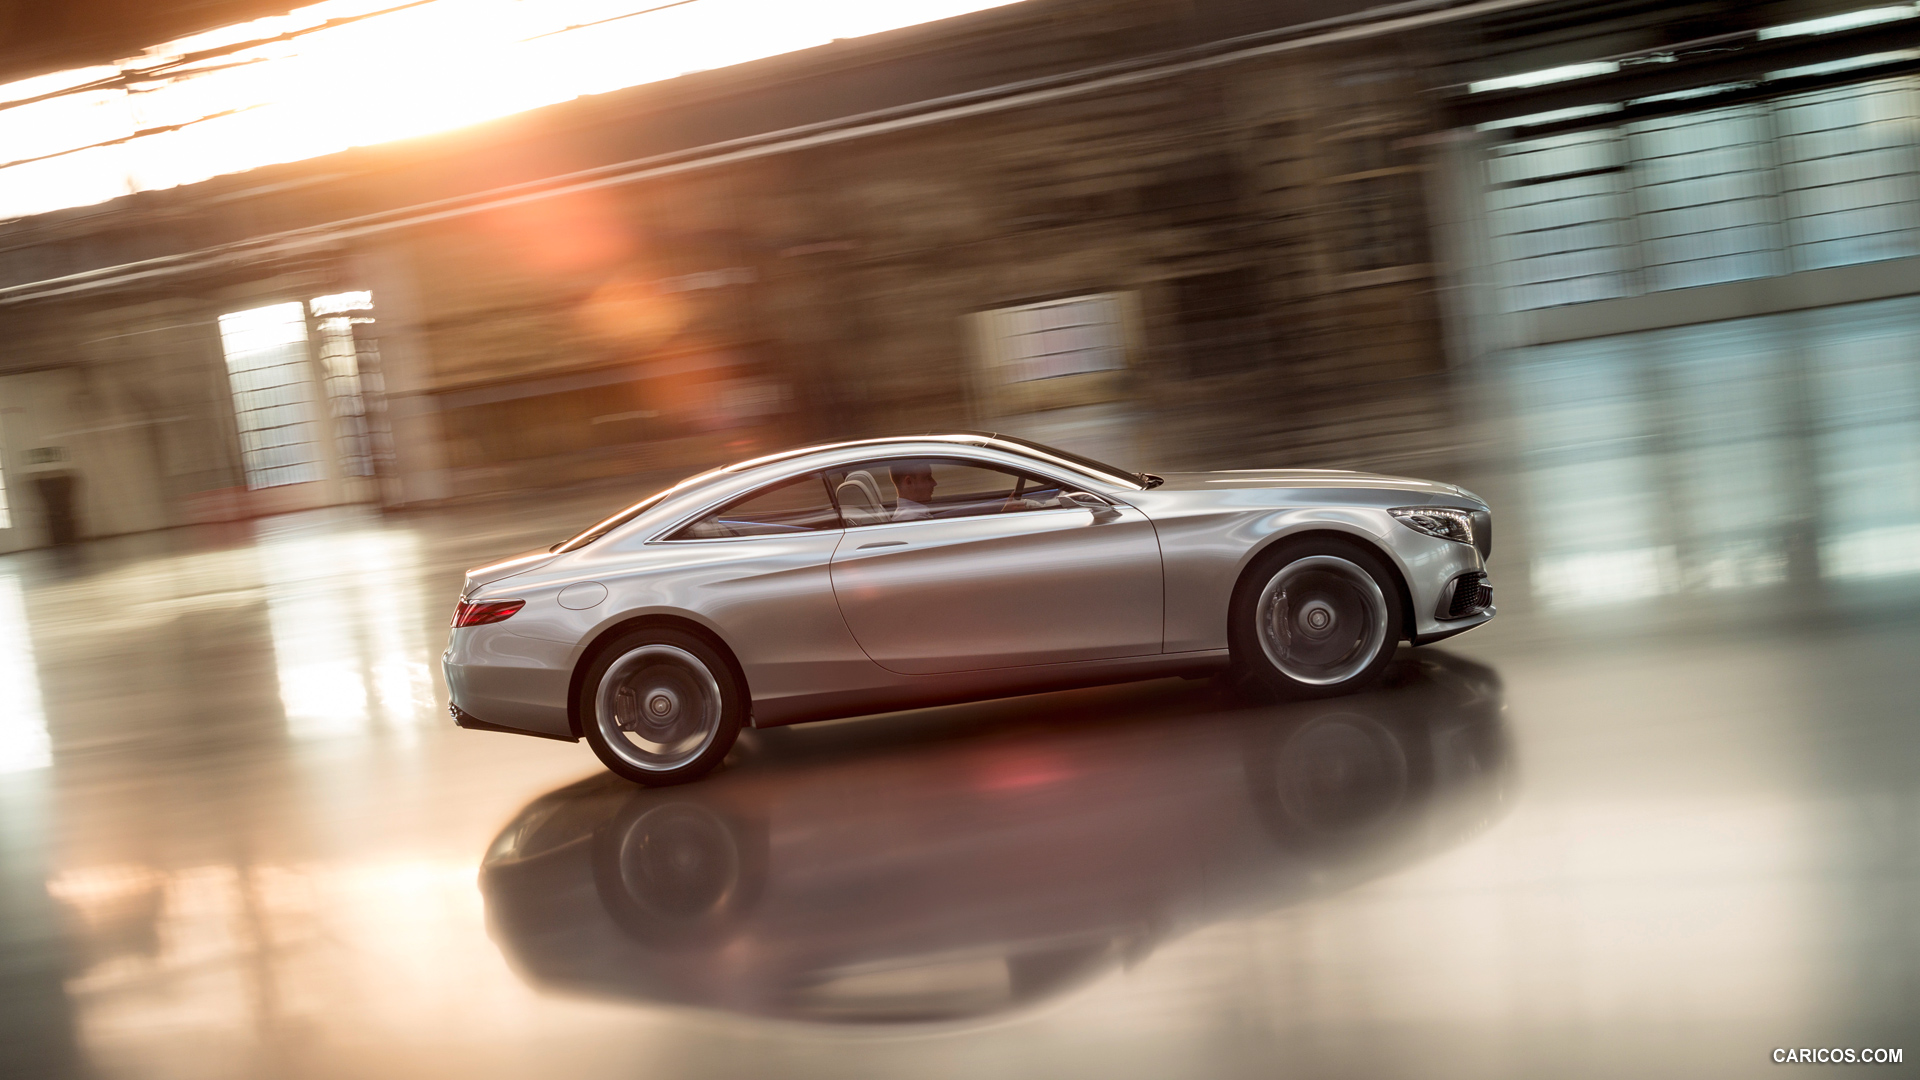 Mercedes-Benz S-Class Coupe Concept (2013)  - Side, #7 of 58